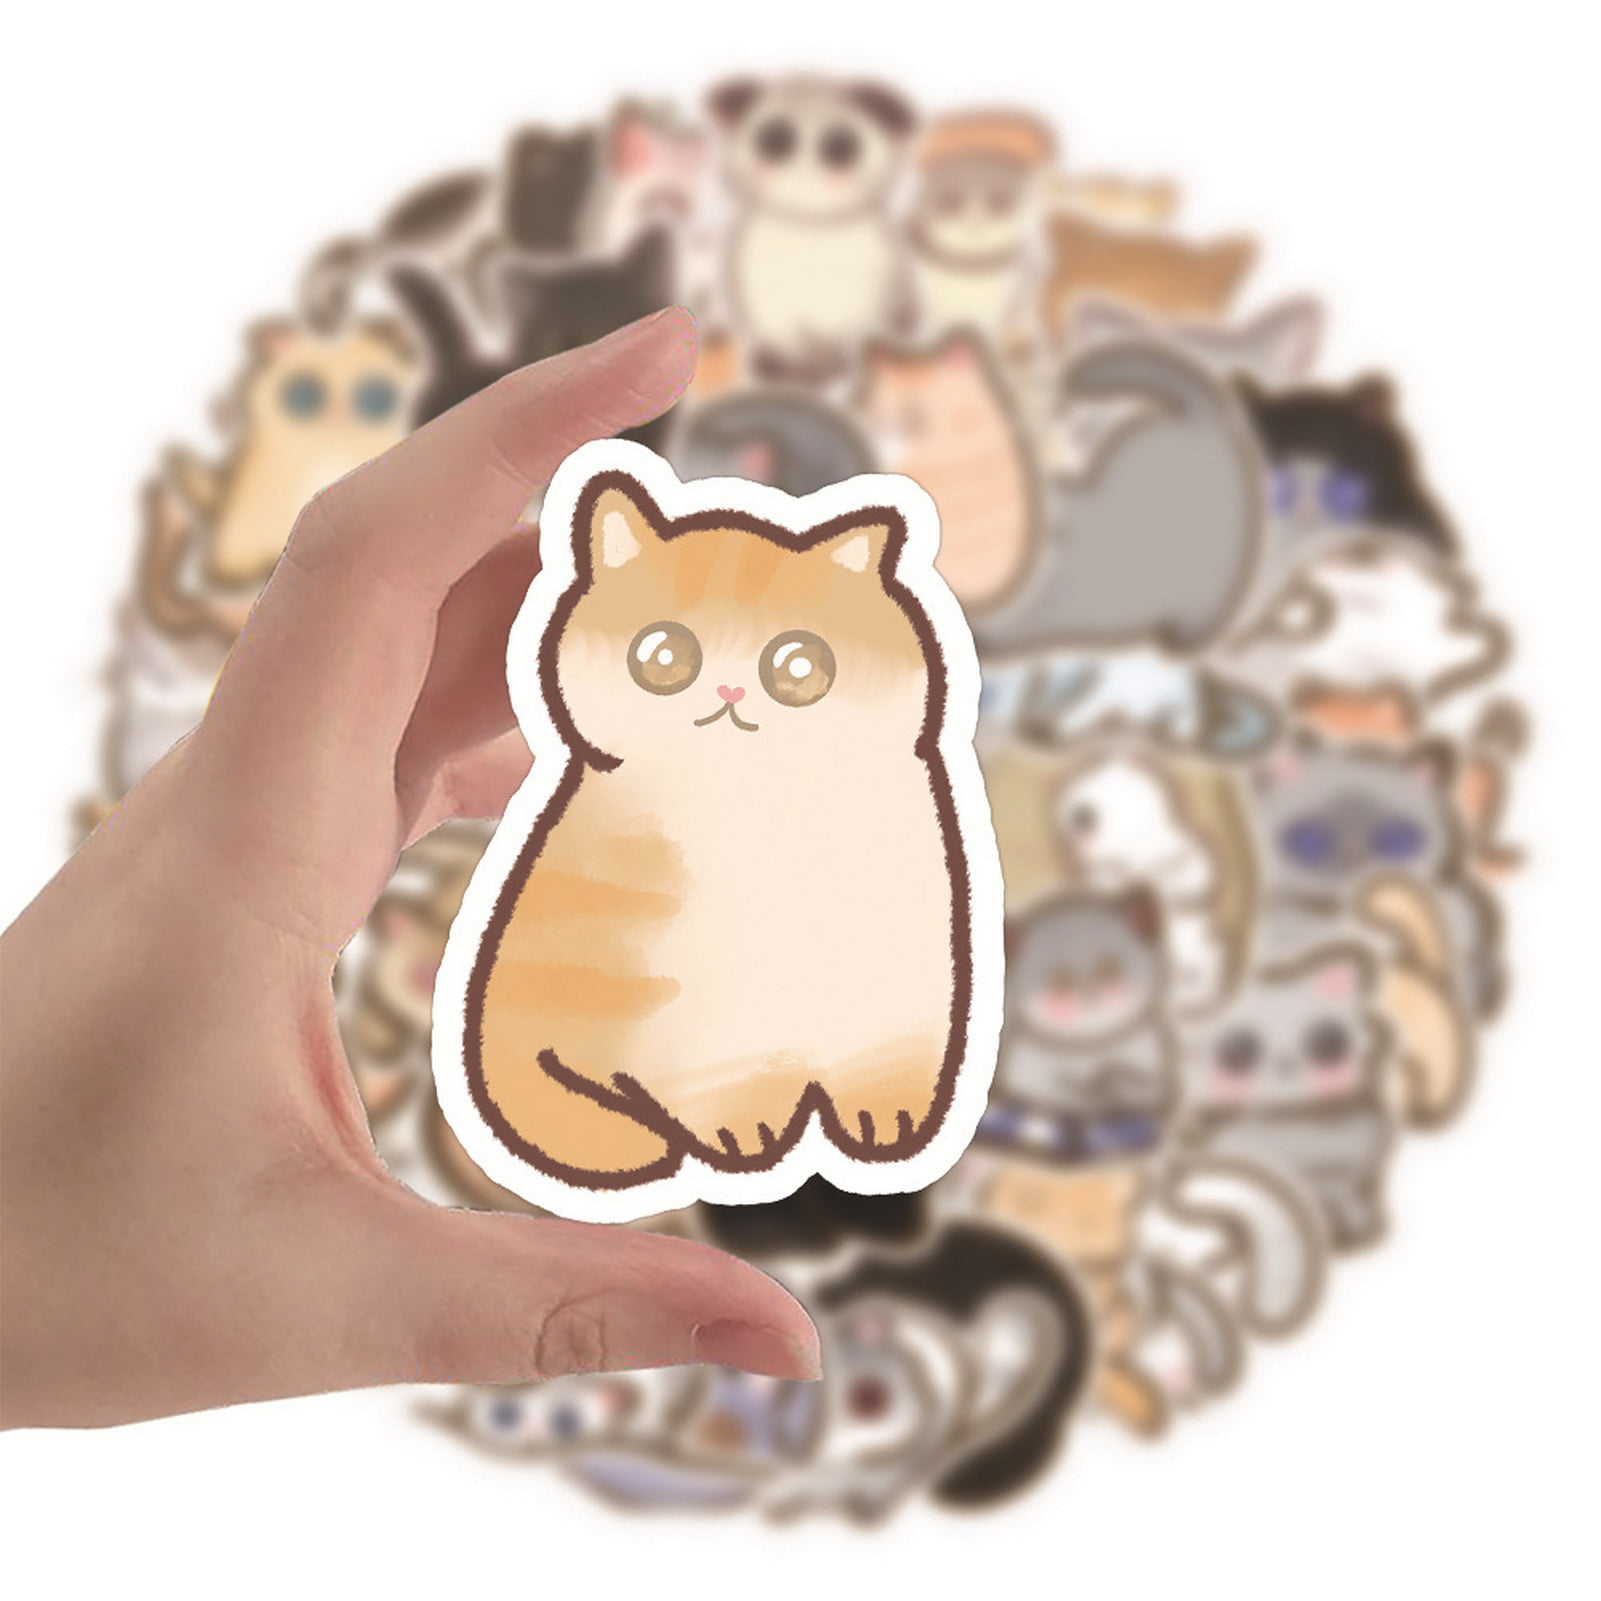 100 Stickers for $10 — Pusheen the Cat Stickers — Wally Pals – Wally  Stickers